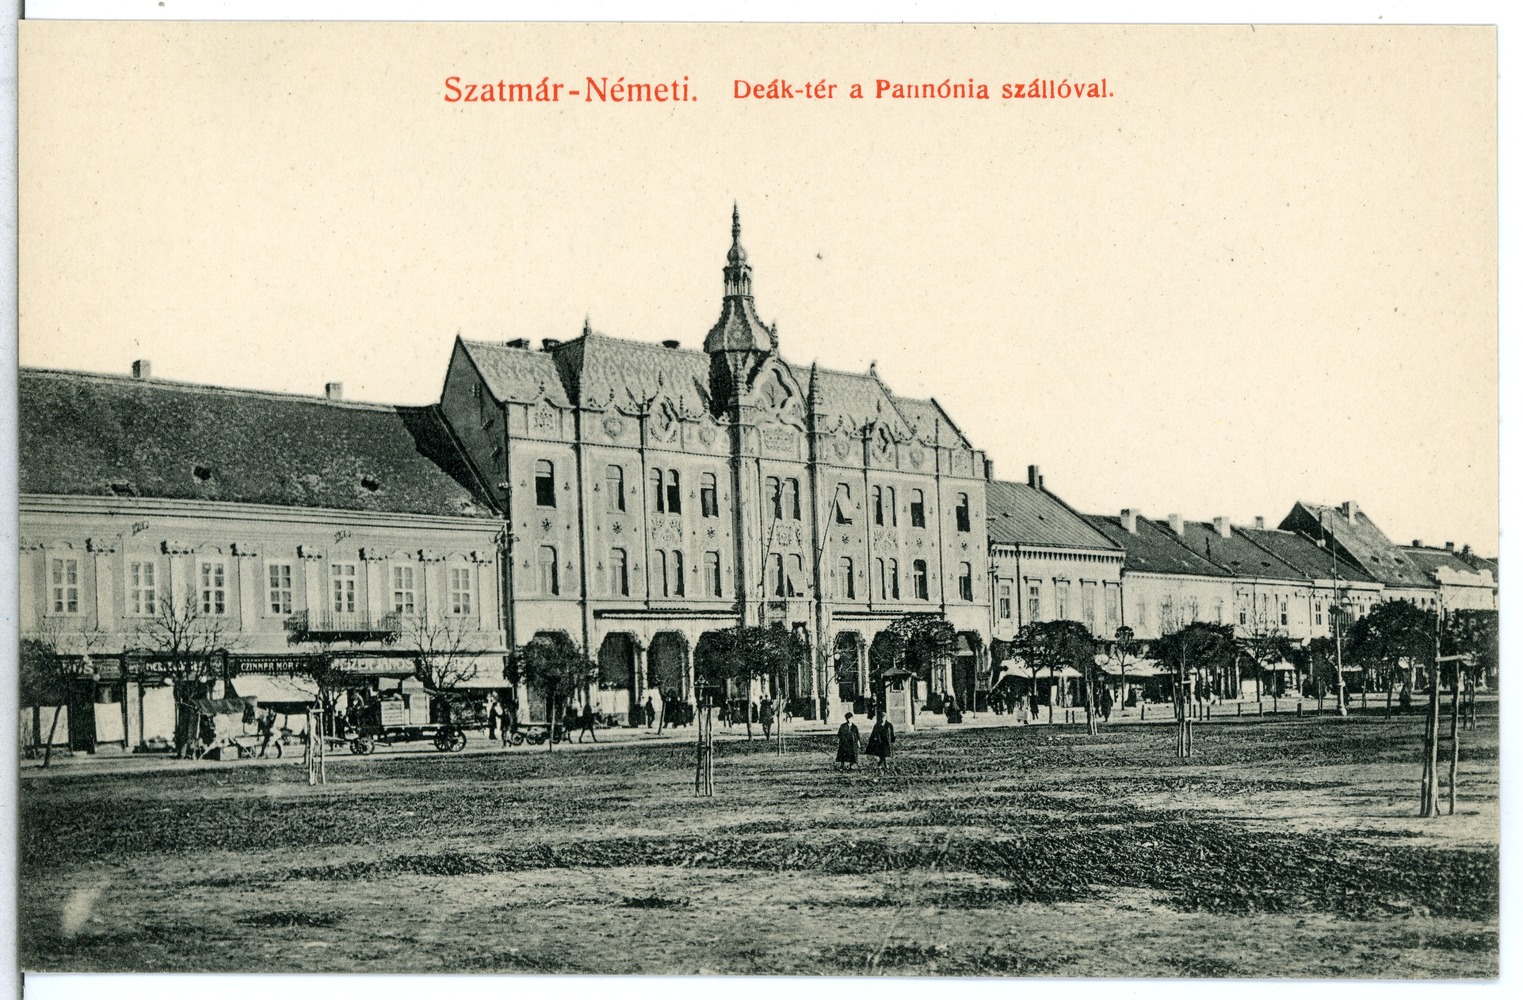 Old picture of how satu mare used to look like - Hotel Pannonia now known as Hotel Dacia